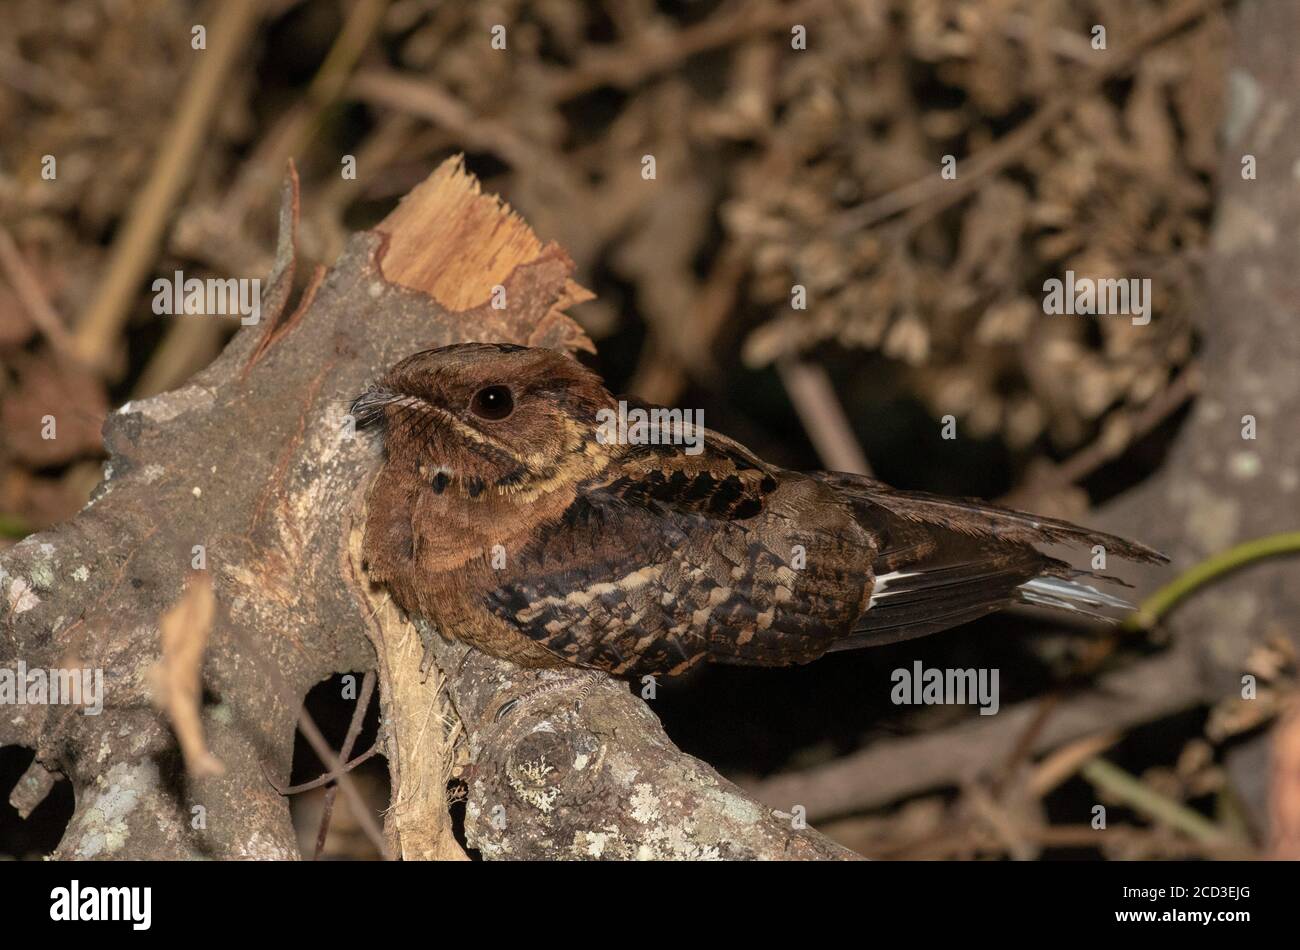 black-shouldered nightjar (Caprimulgus nigriscapularis), resting on a log during the night, side view, Africa Stock Photo